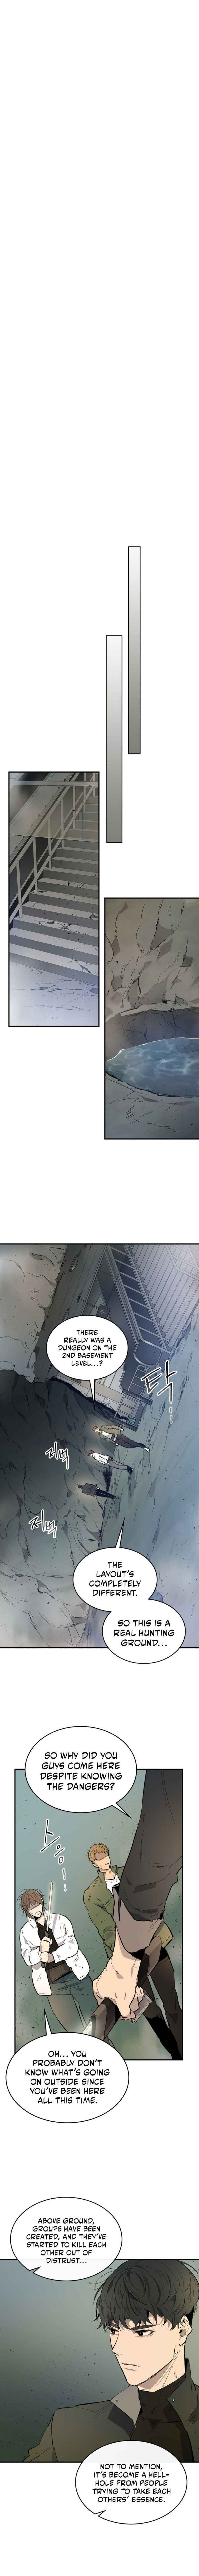 Leveling With The Gods Chapter 9 page 7